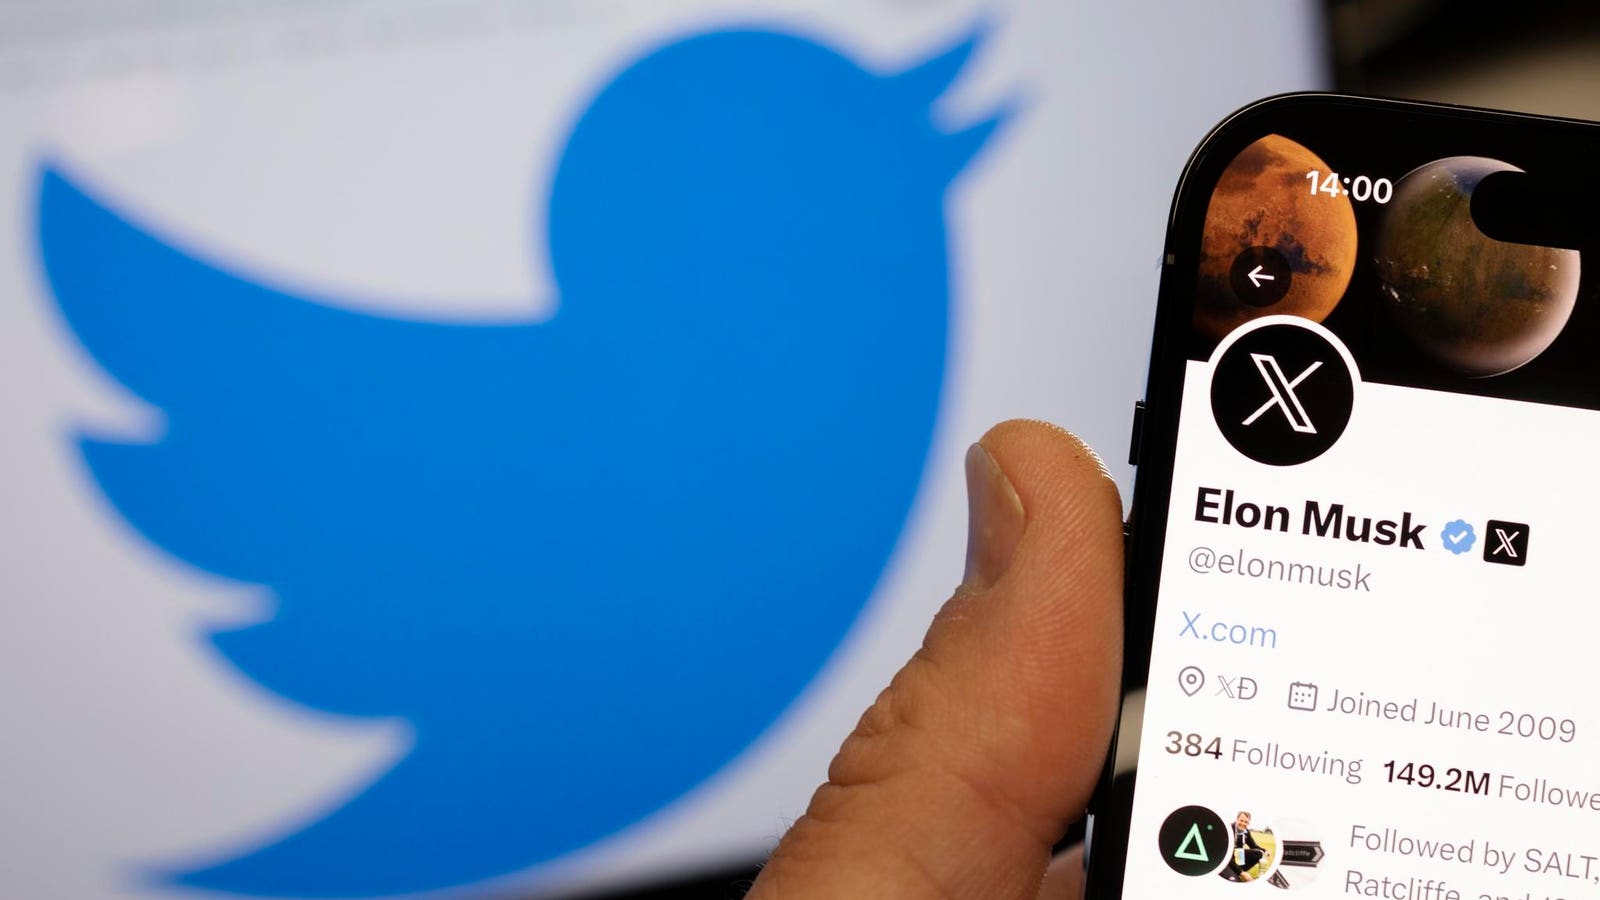 Twitter Suspends, Then Unsuspends, Popular Right-Wing User Who Tweeted Image Of Child Sexual Abuse